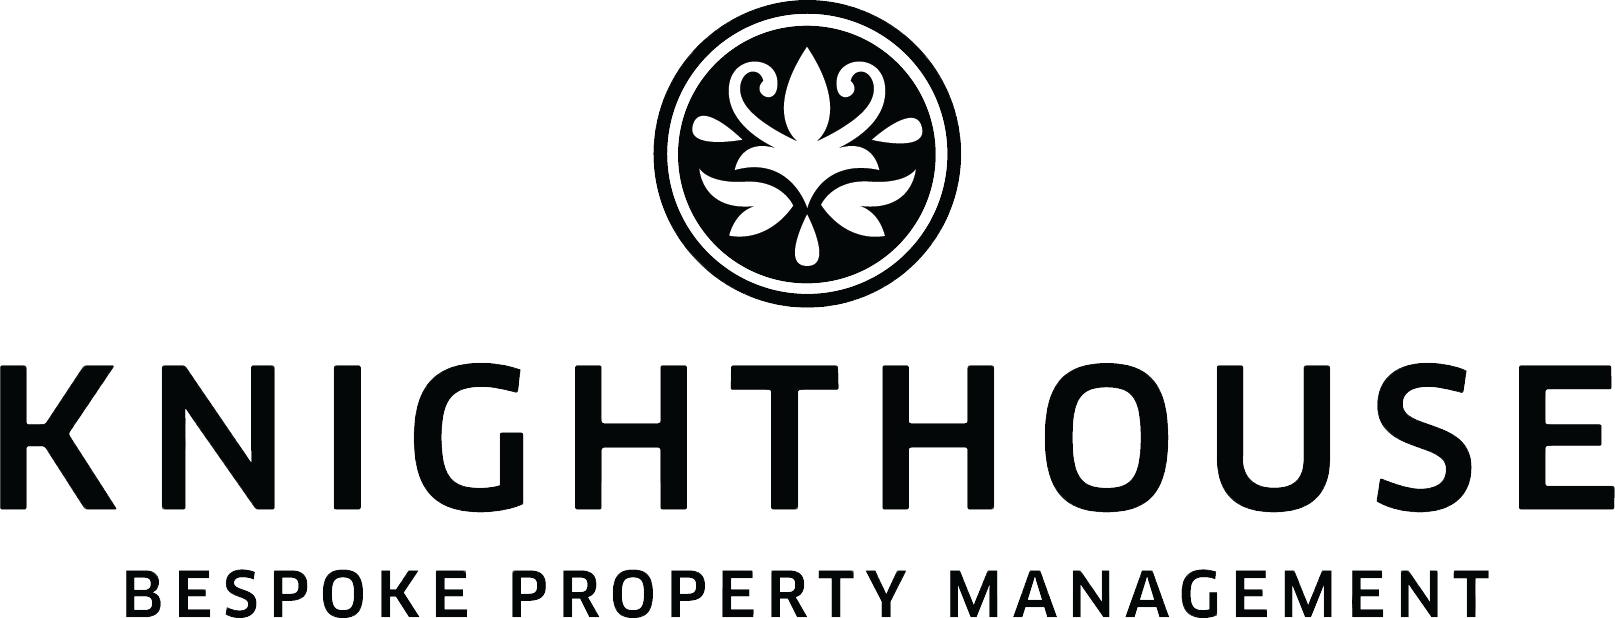 Knighthouse Properties